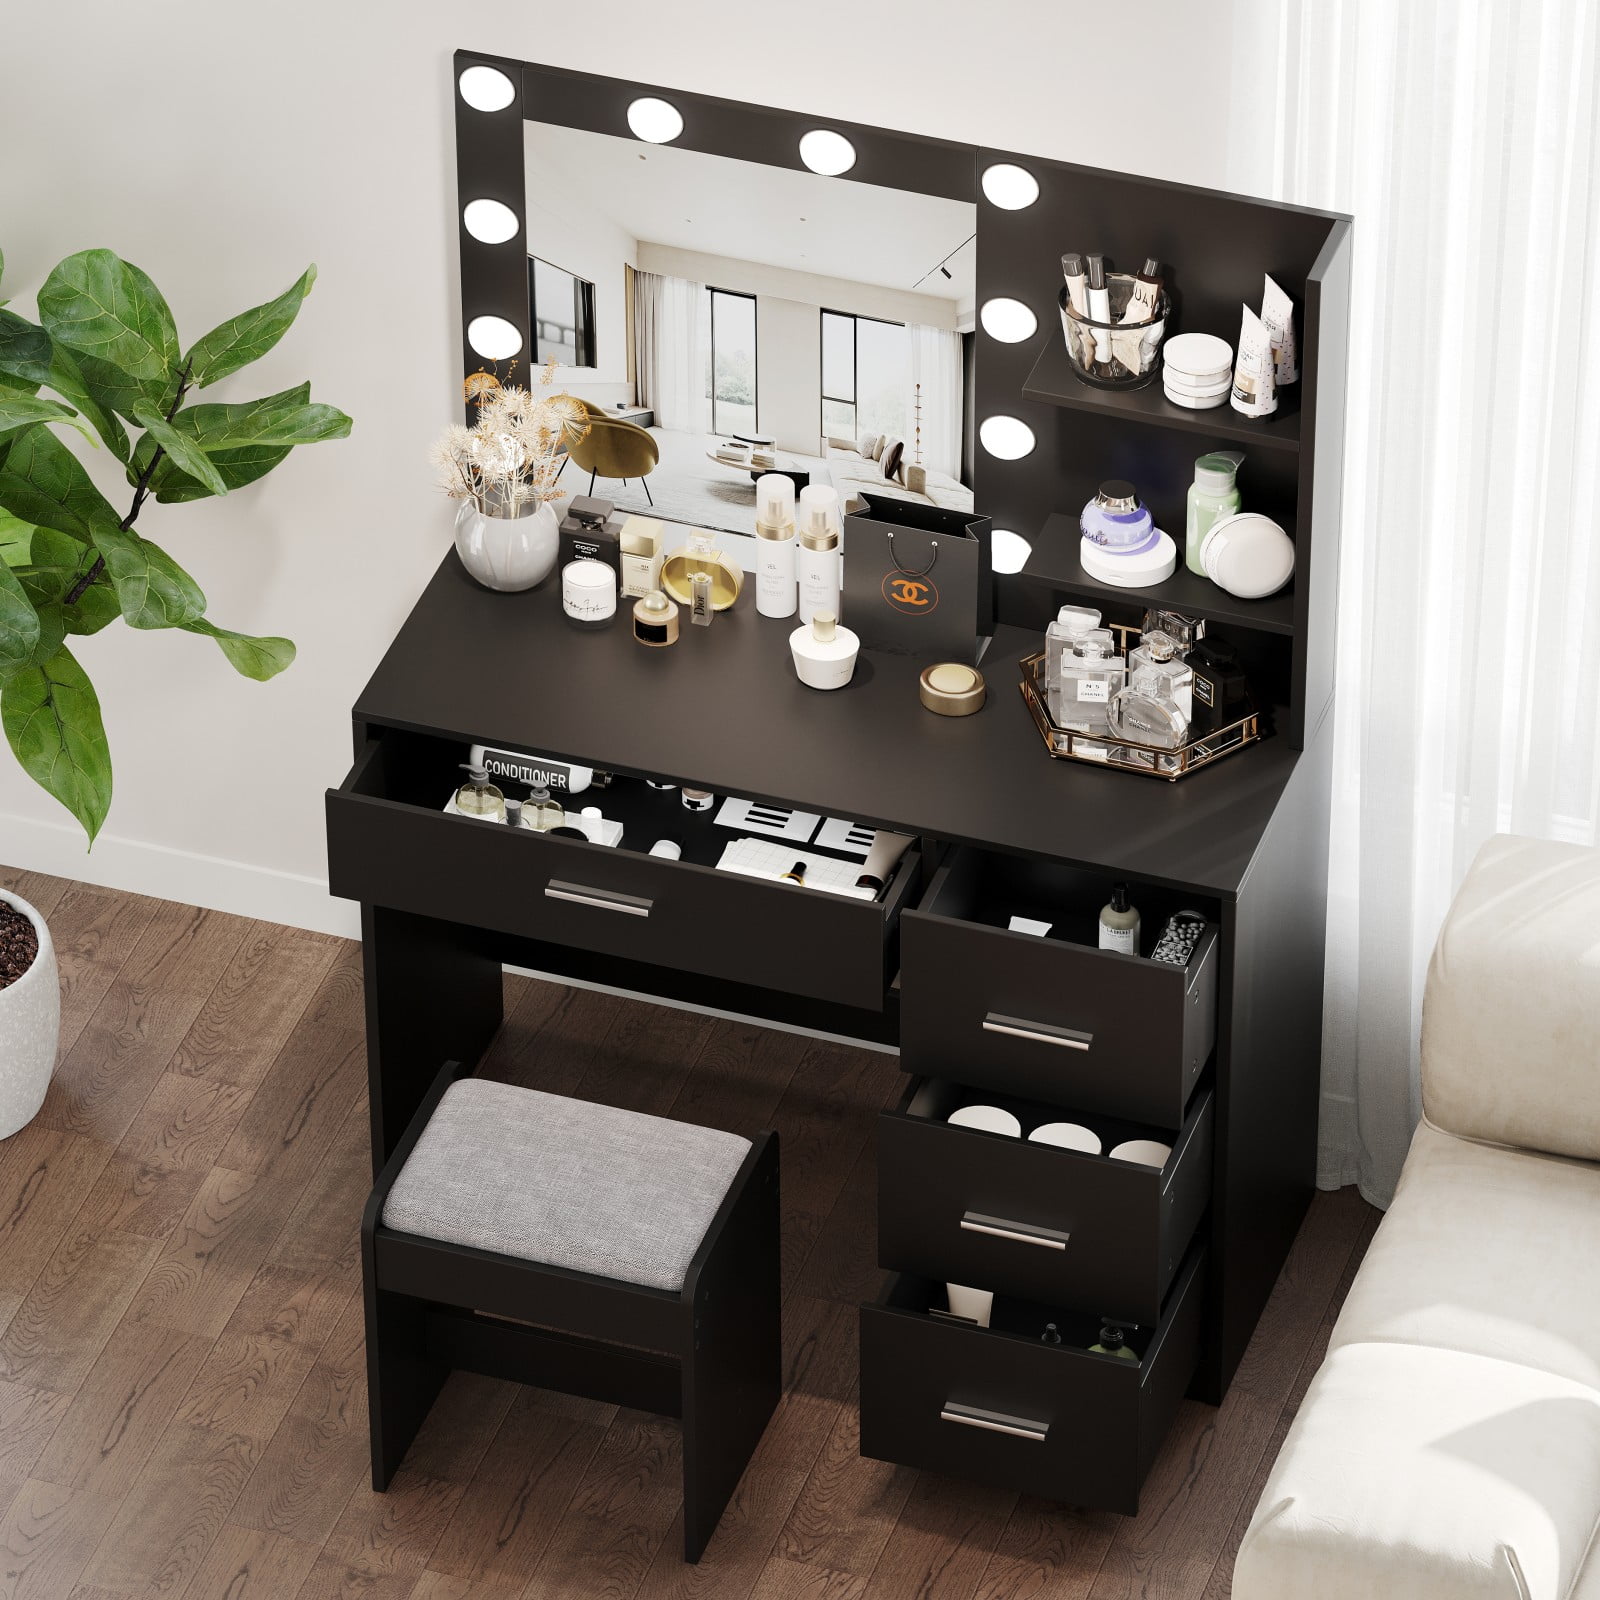 Rovaurx Makeup Vanity Table with Lighted Mirror, Makeup Vanity Desk with  Storage Shelf and 4 Drawers, Bedroom Dressing Table, 10 LED Lights, Black  